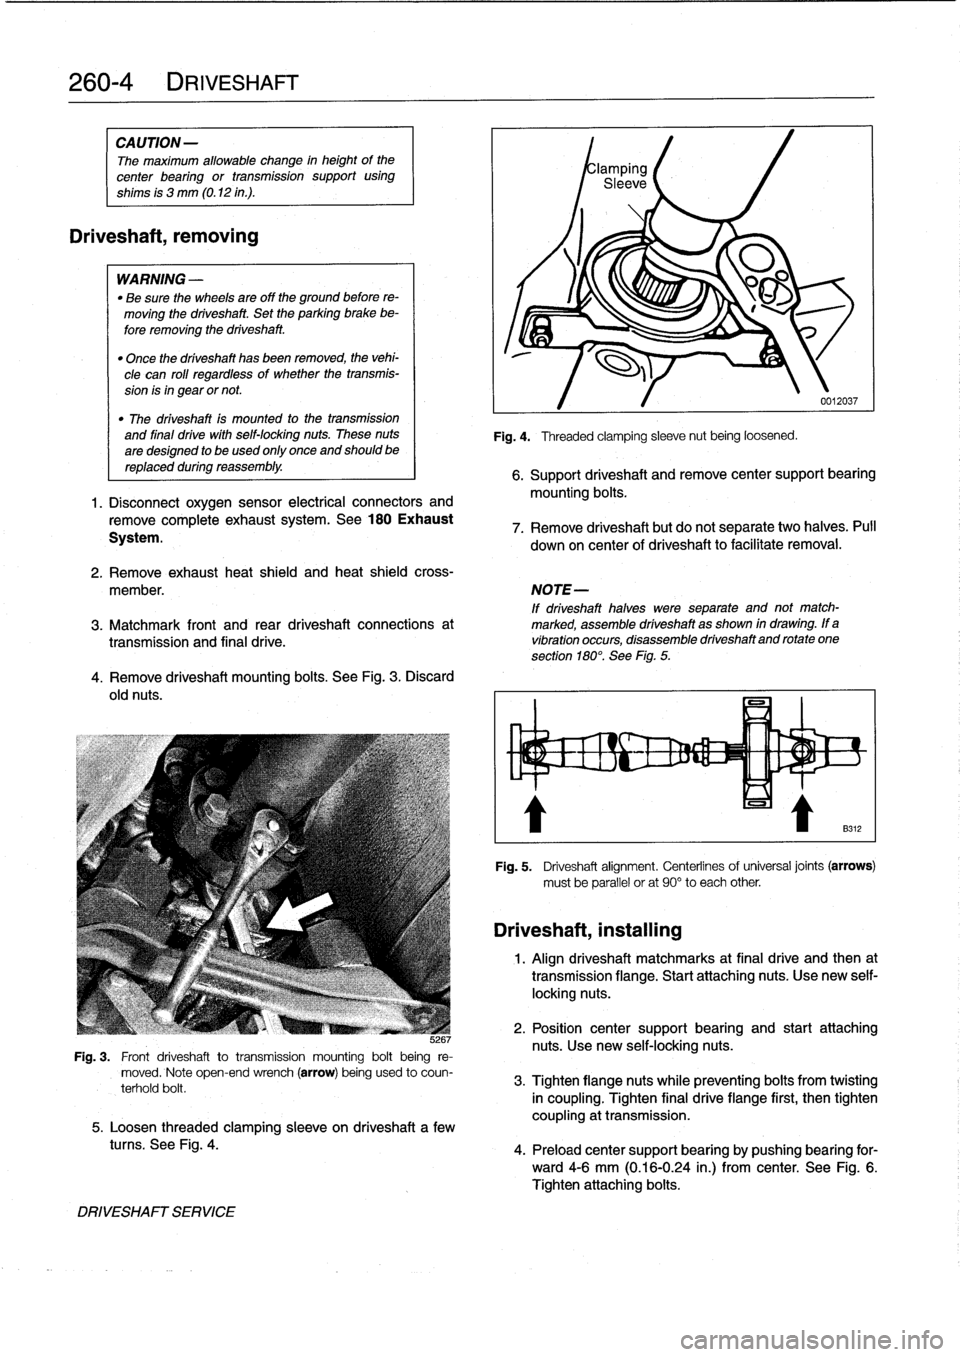 BMW 318i 1995 E36 Workshop Manual 
260-
4
DRIVESHAFT

CAUTION
-

The
maximum
allowable
change
in
height
of
the

center
bearing
or
transmission
support
using

shims
is
3
mm
(0
.12
in
.)
.

Driveshaft,
removing

WARNING
-

"
Be
sure
the